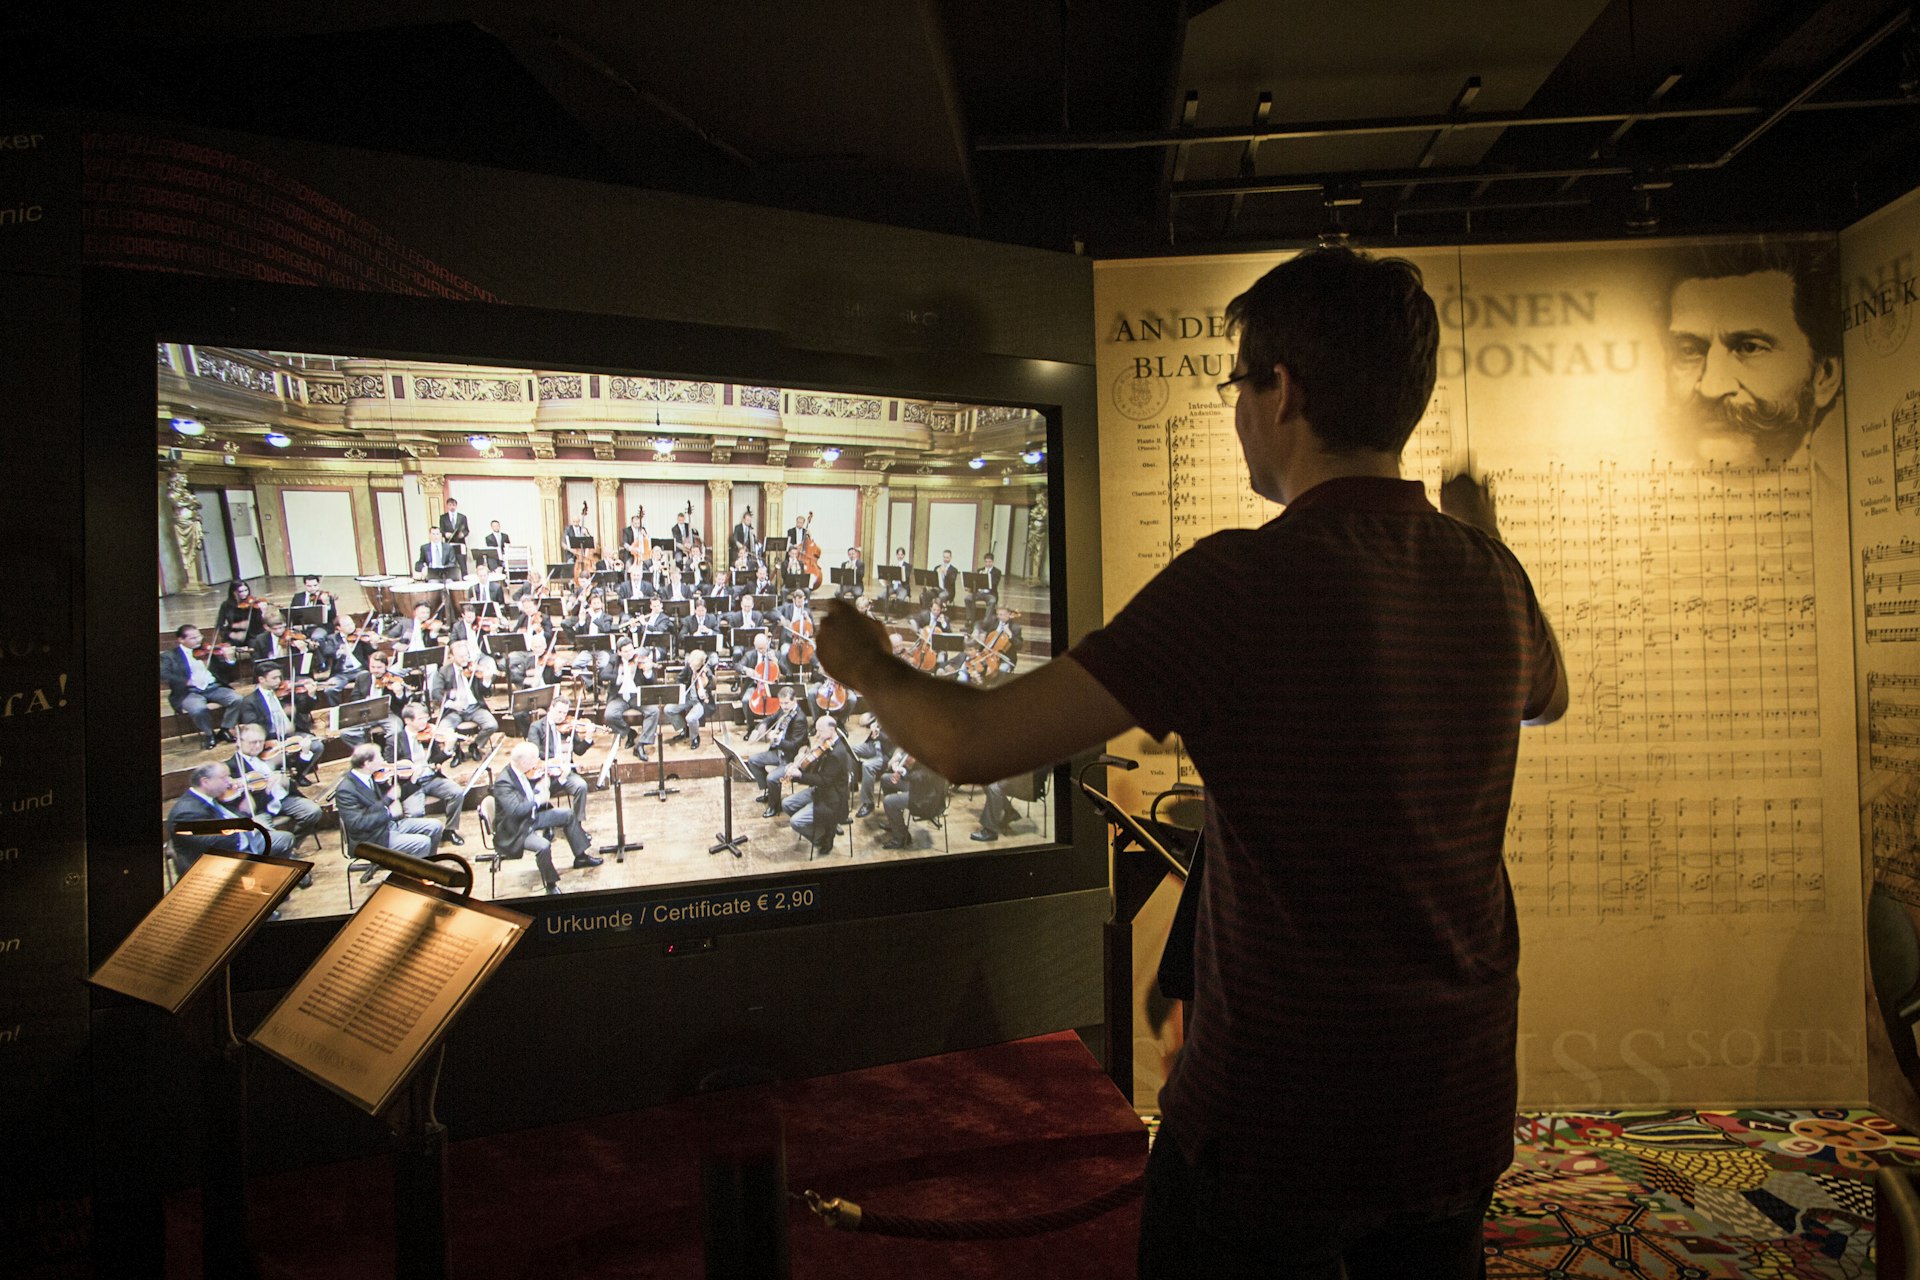 A person conducts a virtual orchestra at Haus der Musik in Vienna